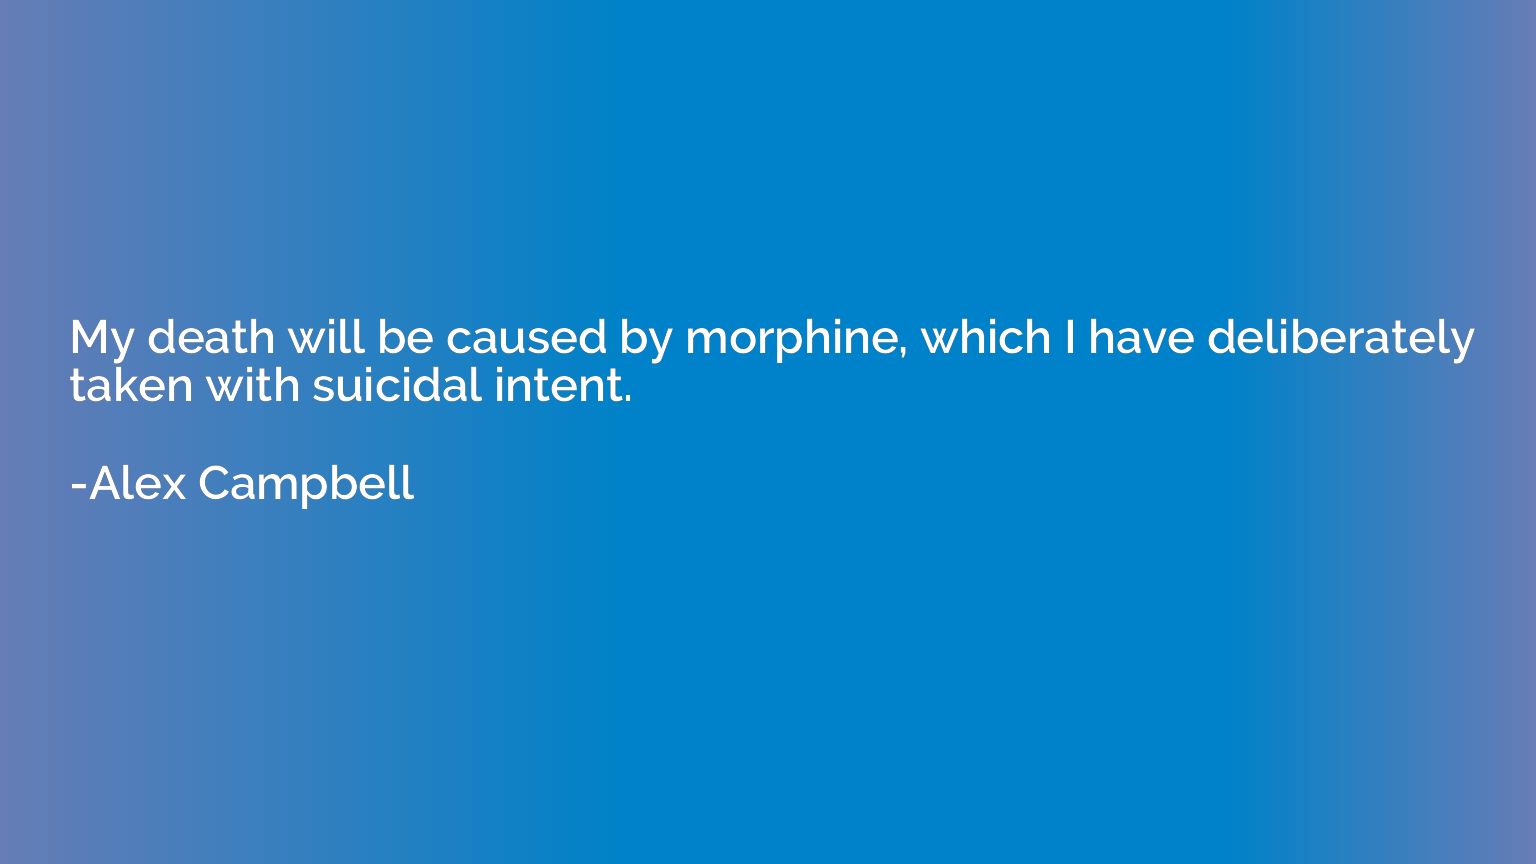 My death will be caused by morphine, which I have deliberate